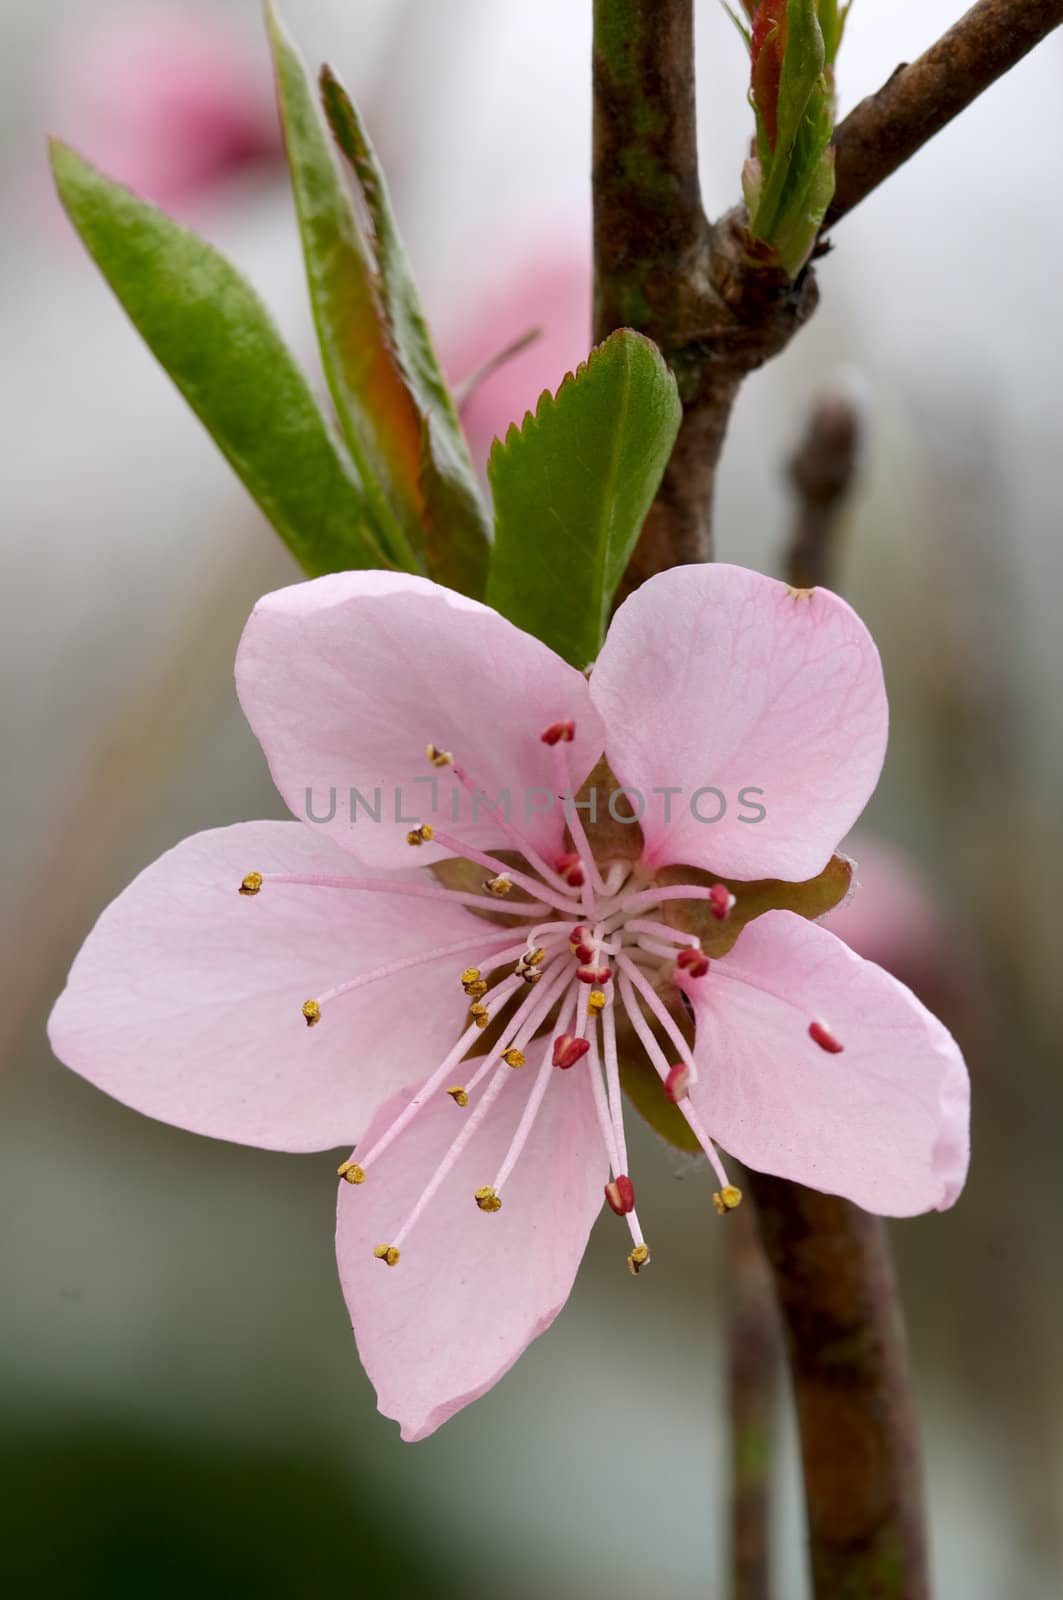 Close-up photo of rosy flower of peach tree